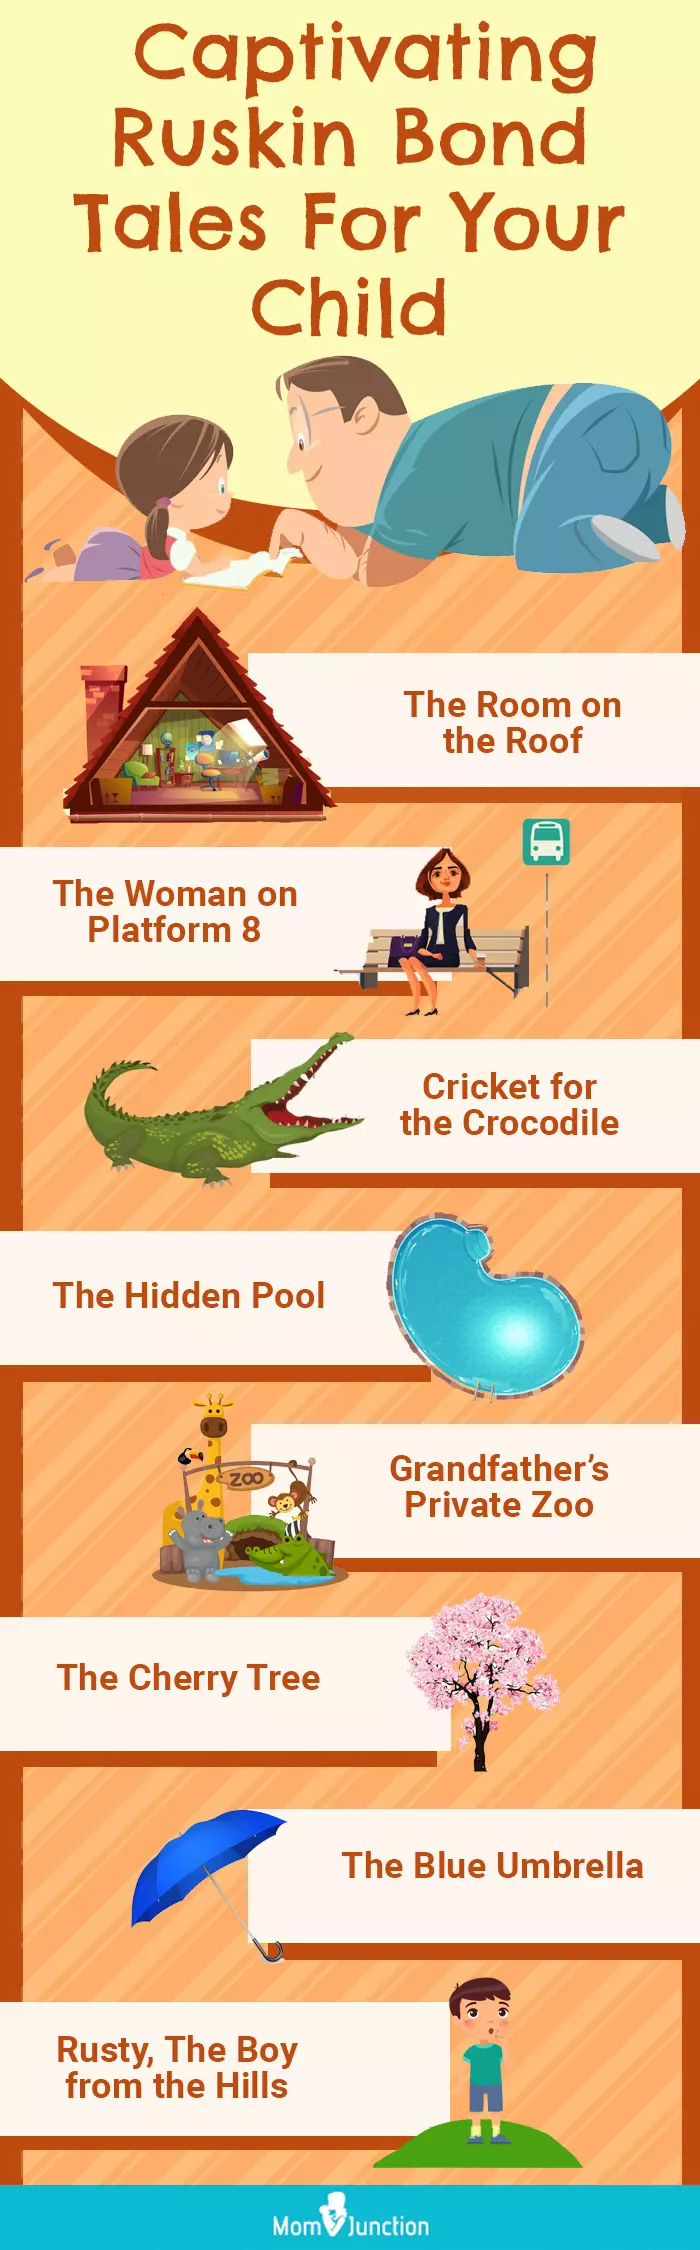 captivating ruskin bond tales for your child (infographic)